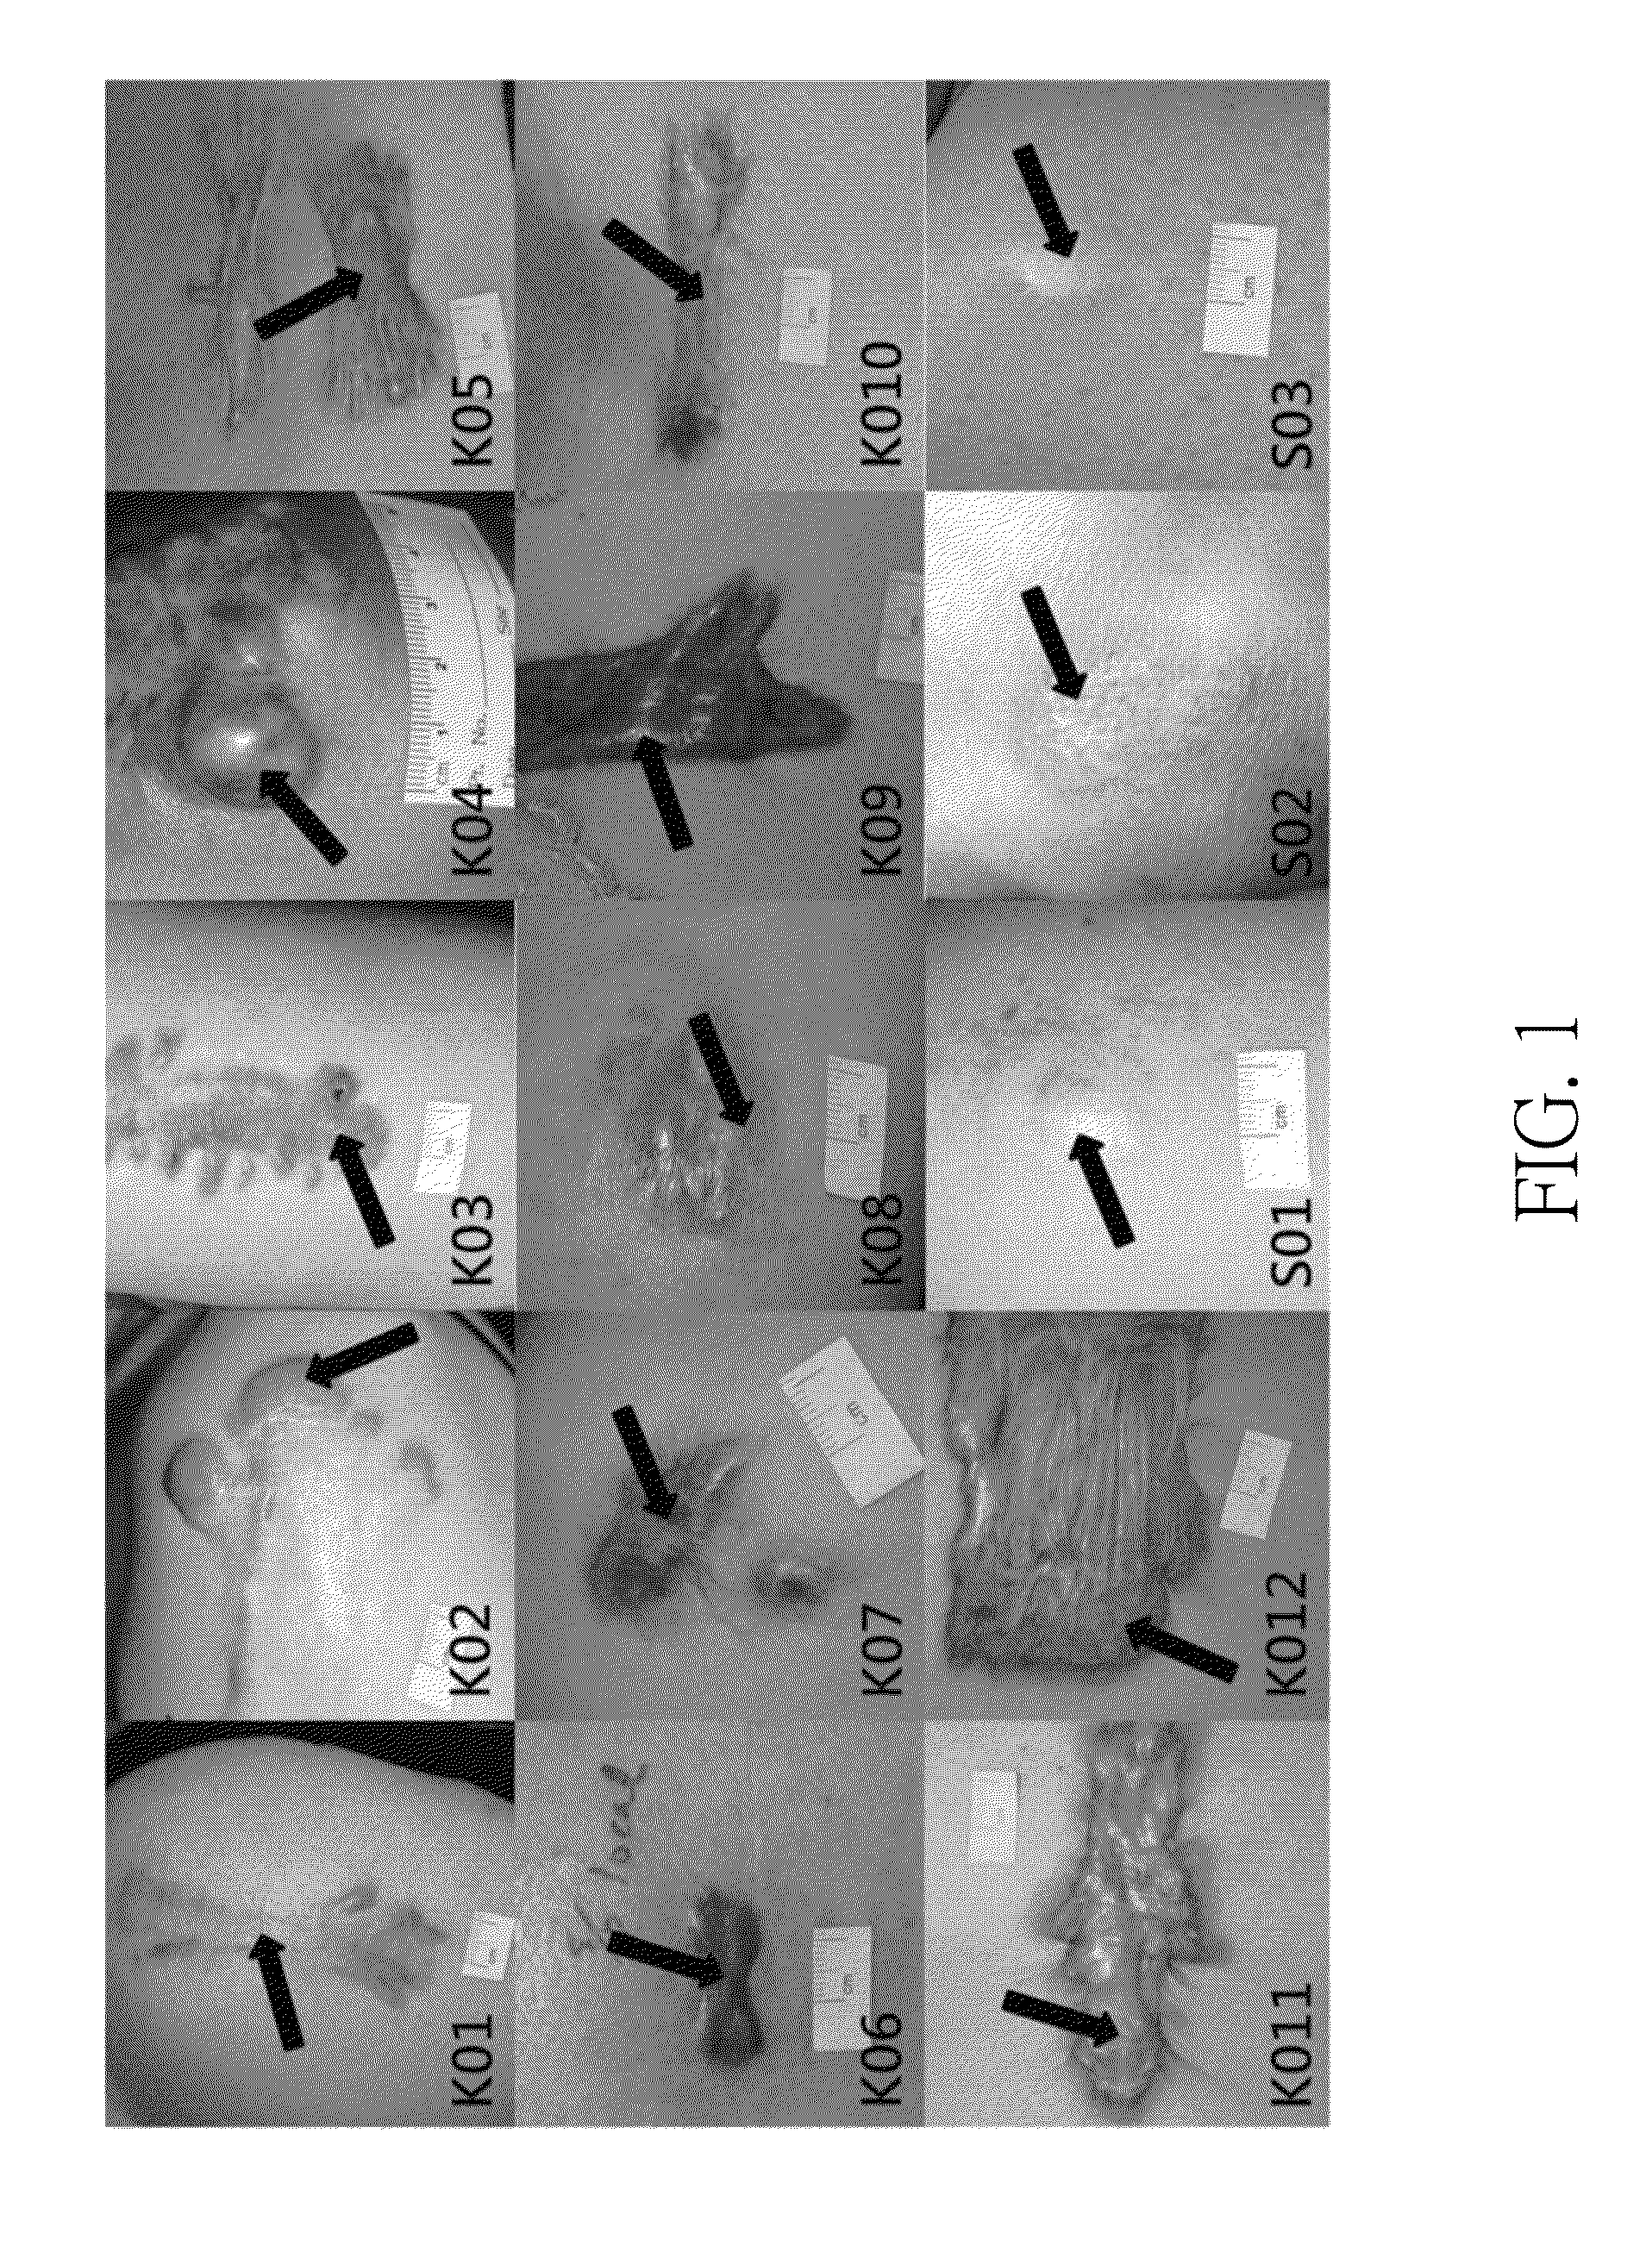 Method and optical system for evaluating concentrations of components in tissue